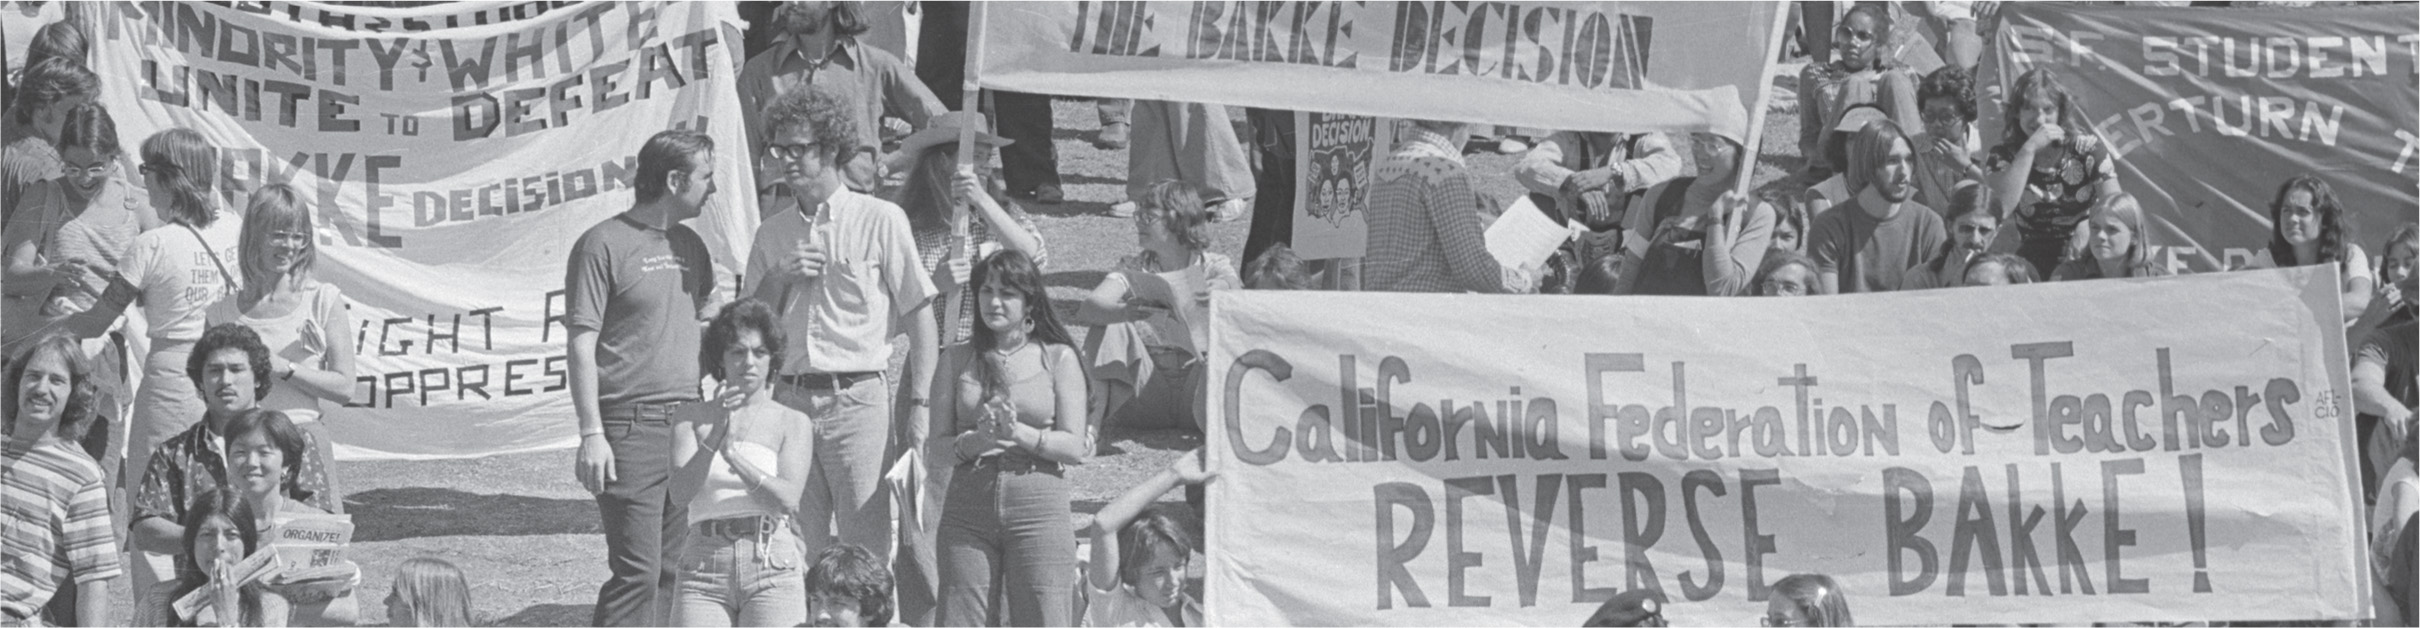 photo: protesters carry a sign that reads California federation of Teachers Reverse Bakke!